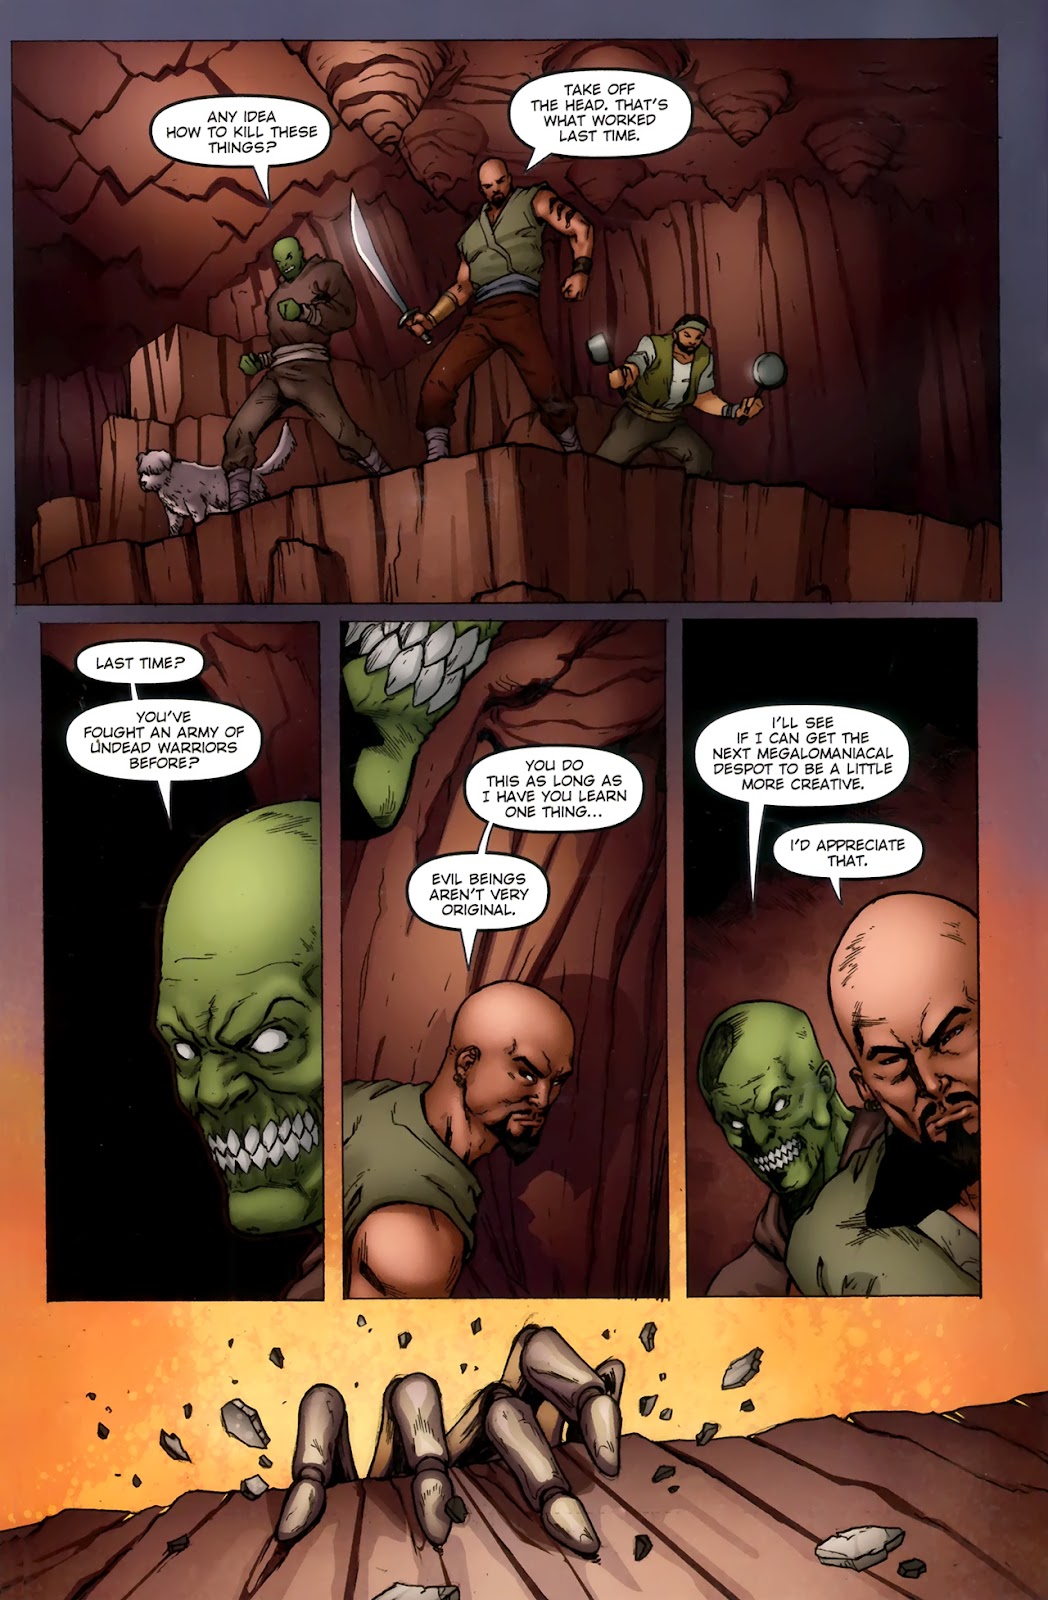 1001 Arabian Nights: The Adventures of Sinbad issue 11 - Page 8